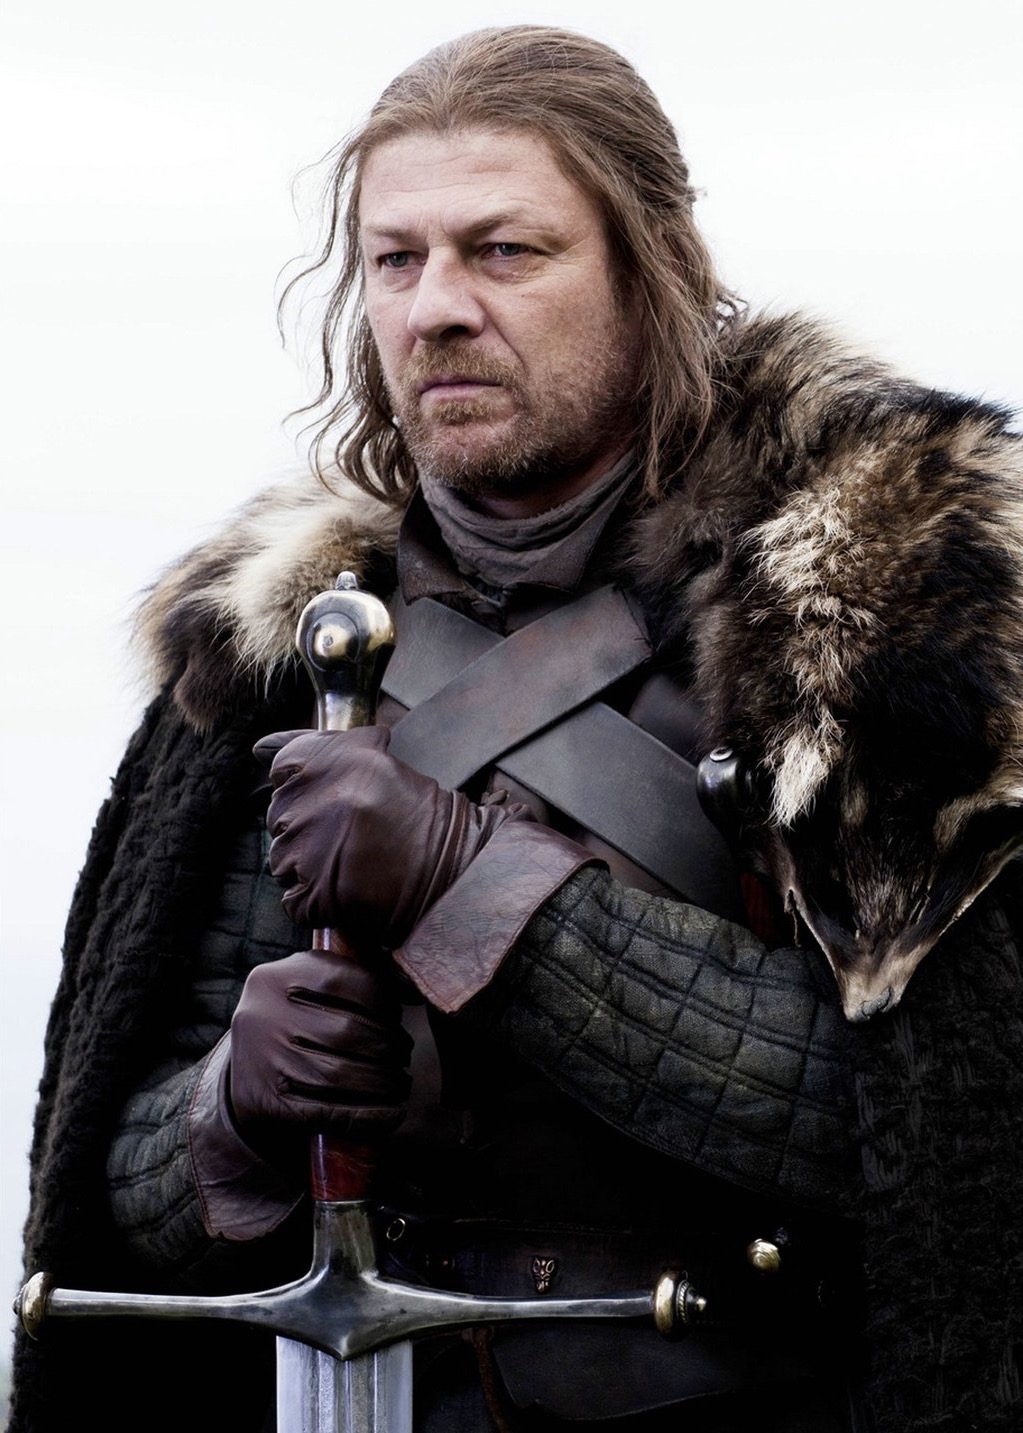 Eddard Stark - Visiting the Tower of Joy in Mount and